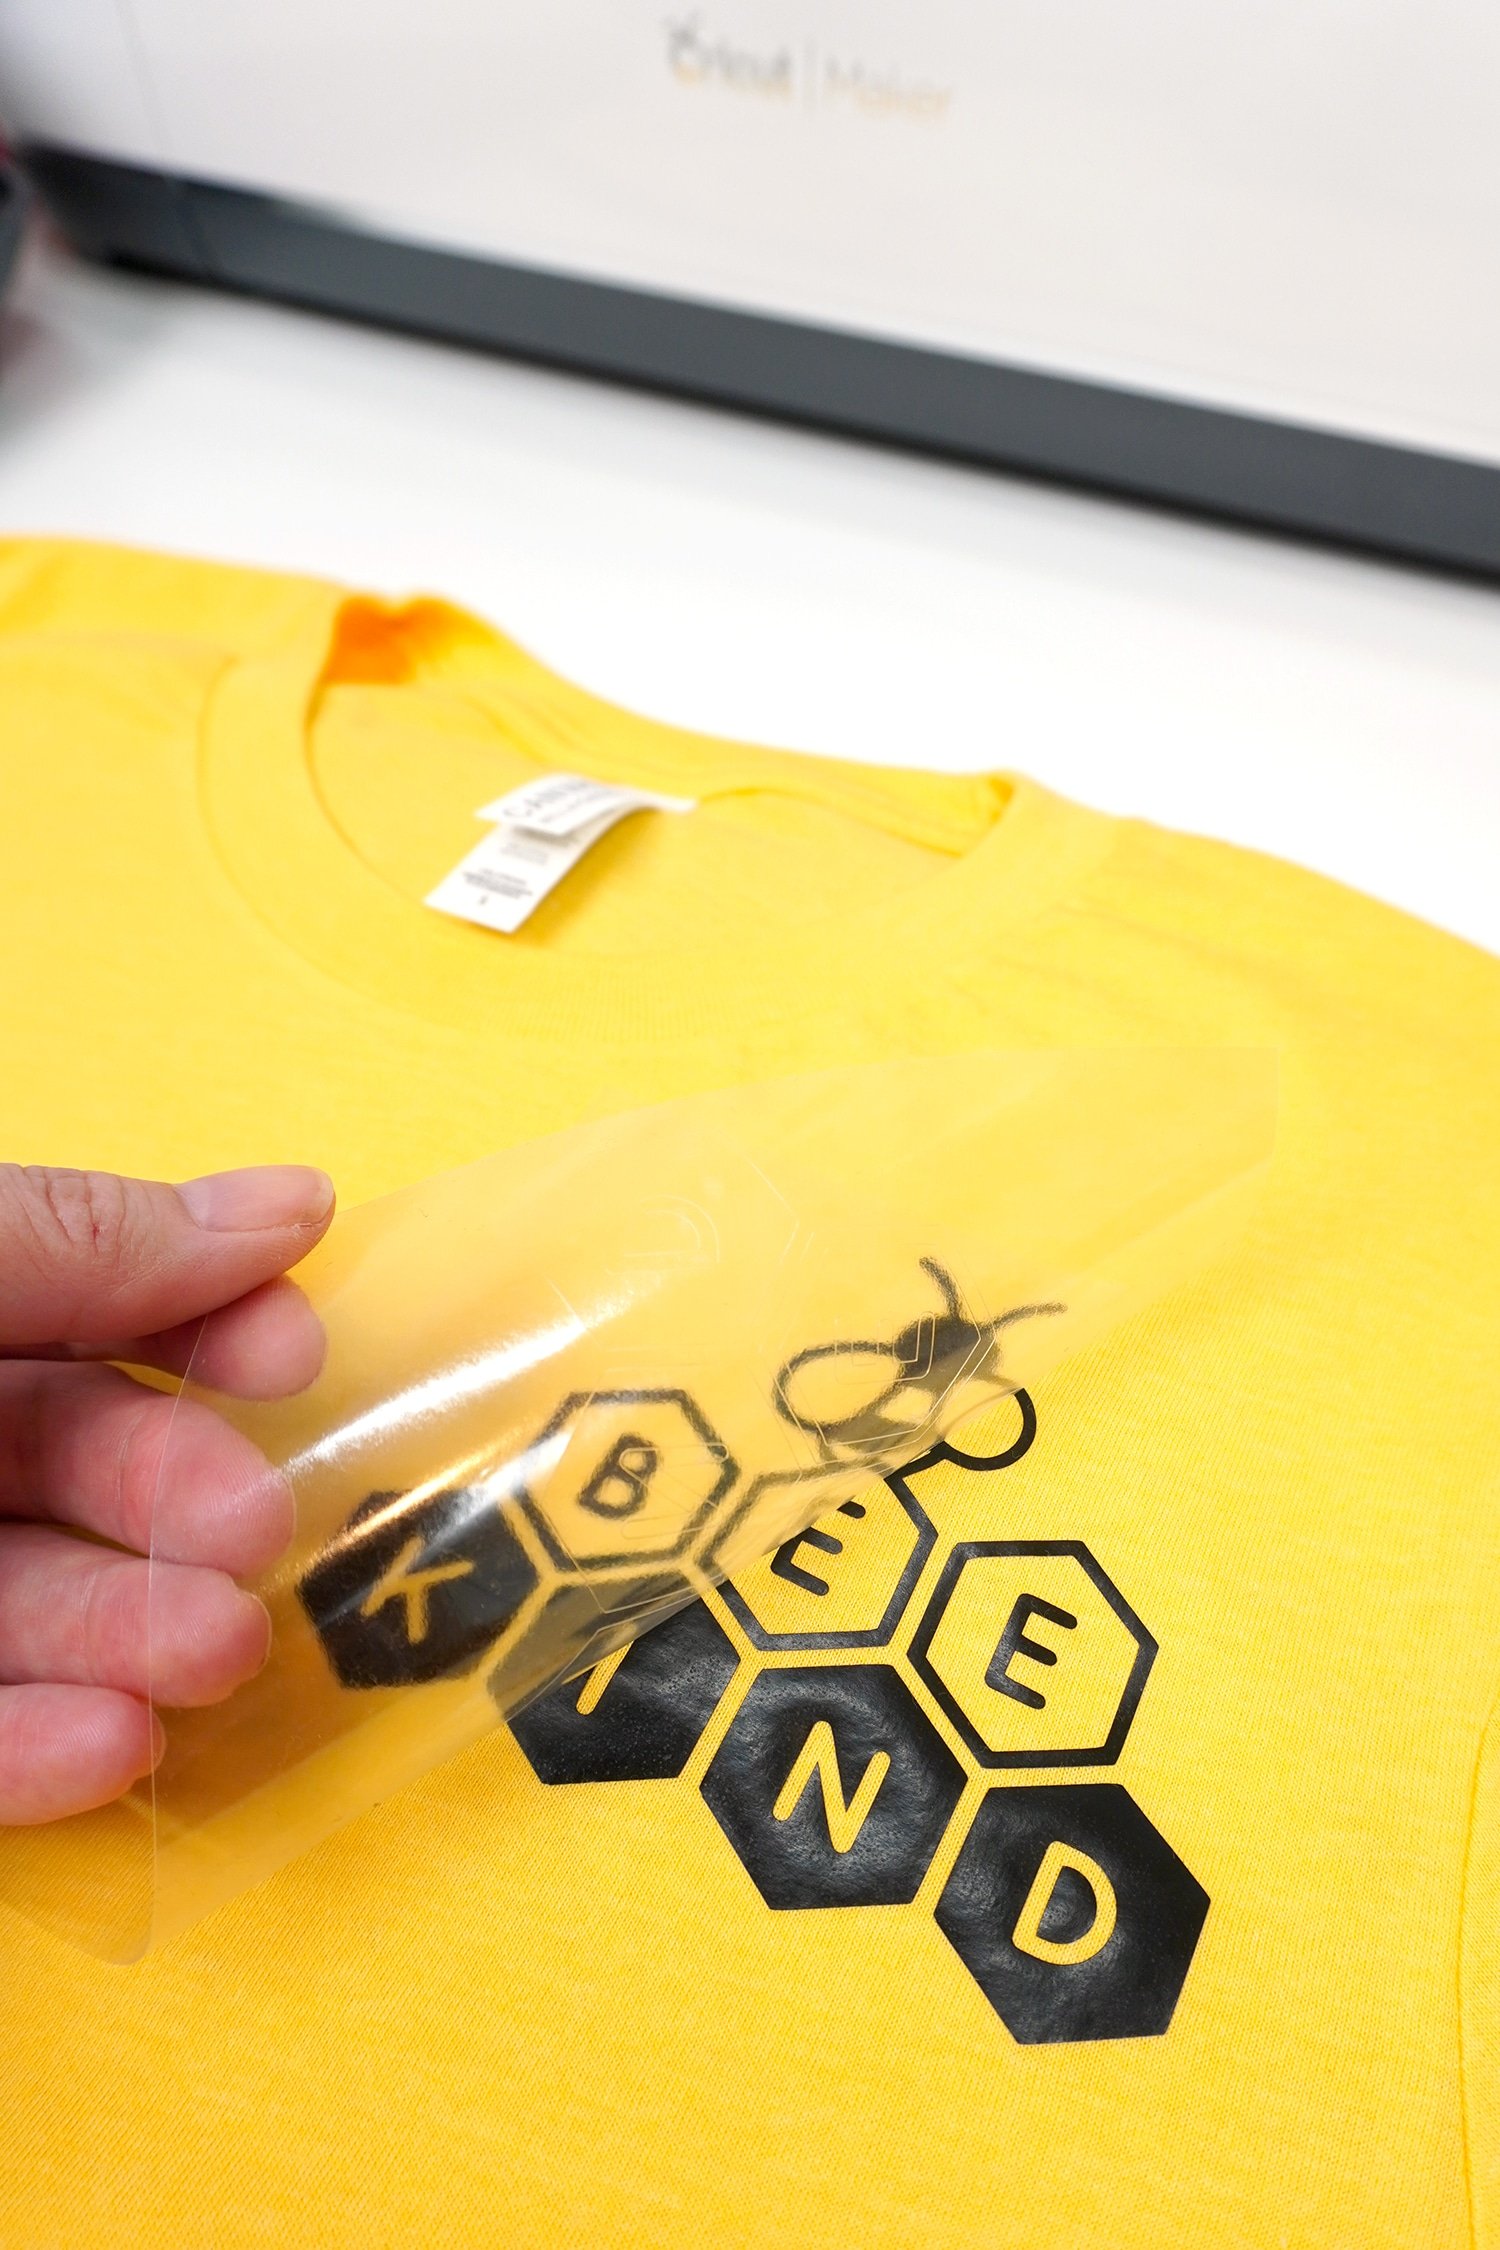 pulling off iron on backing plastic to reveal Bee Kind image on yellow tshirt